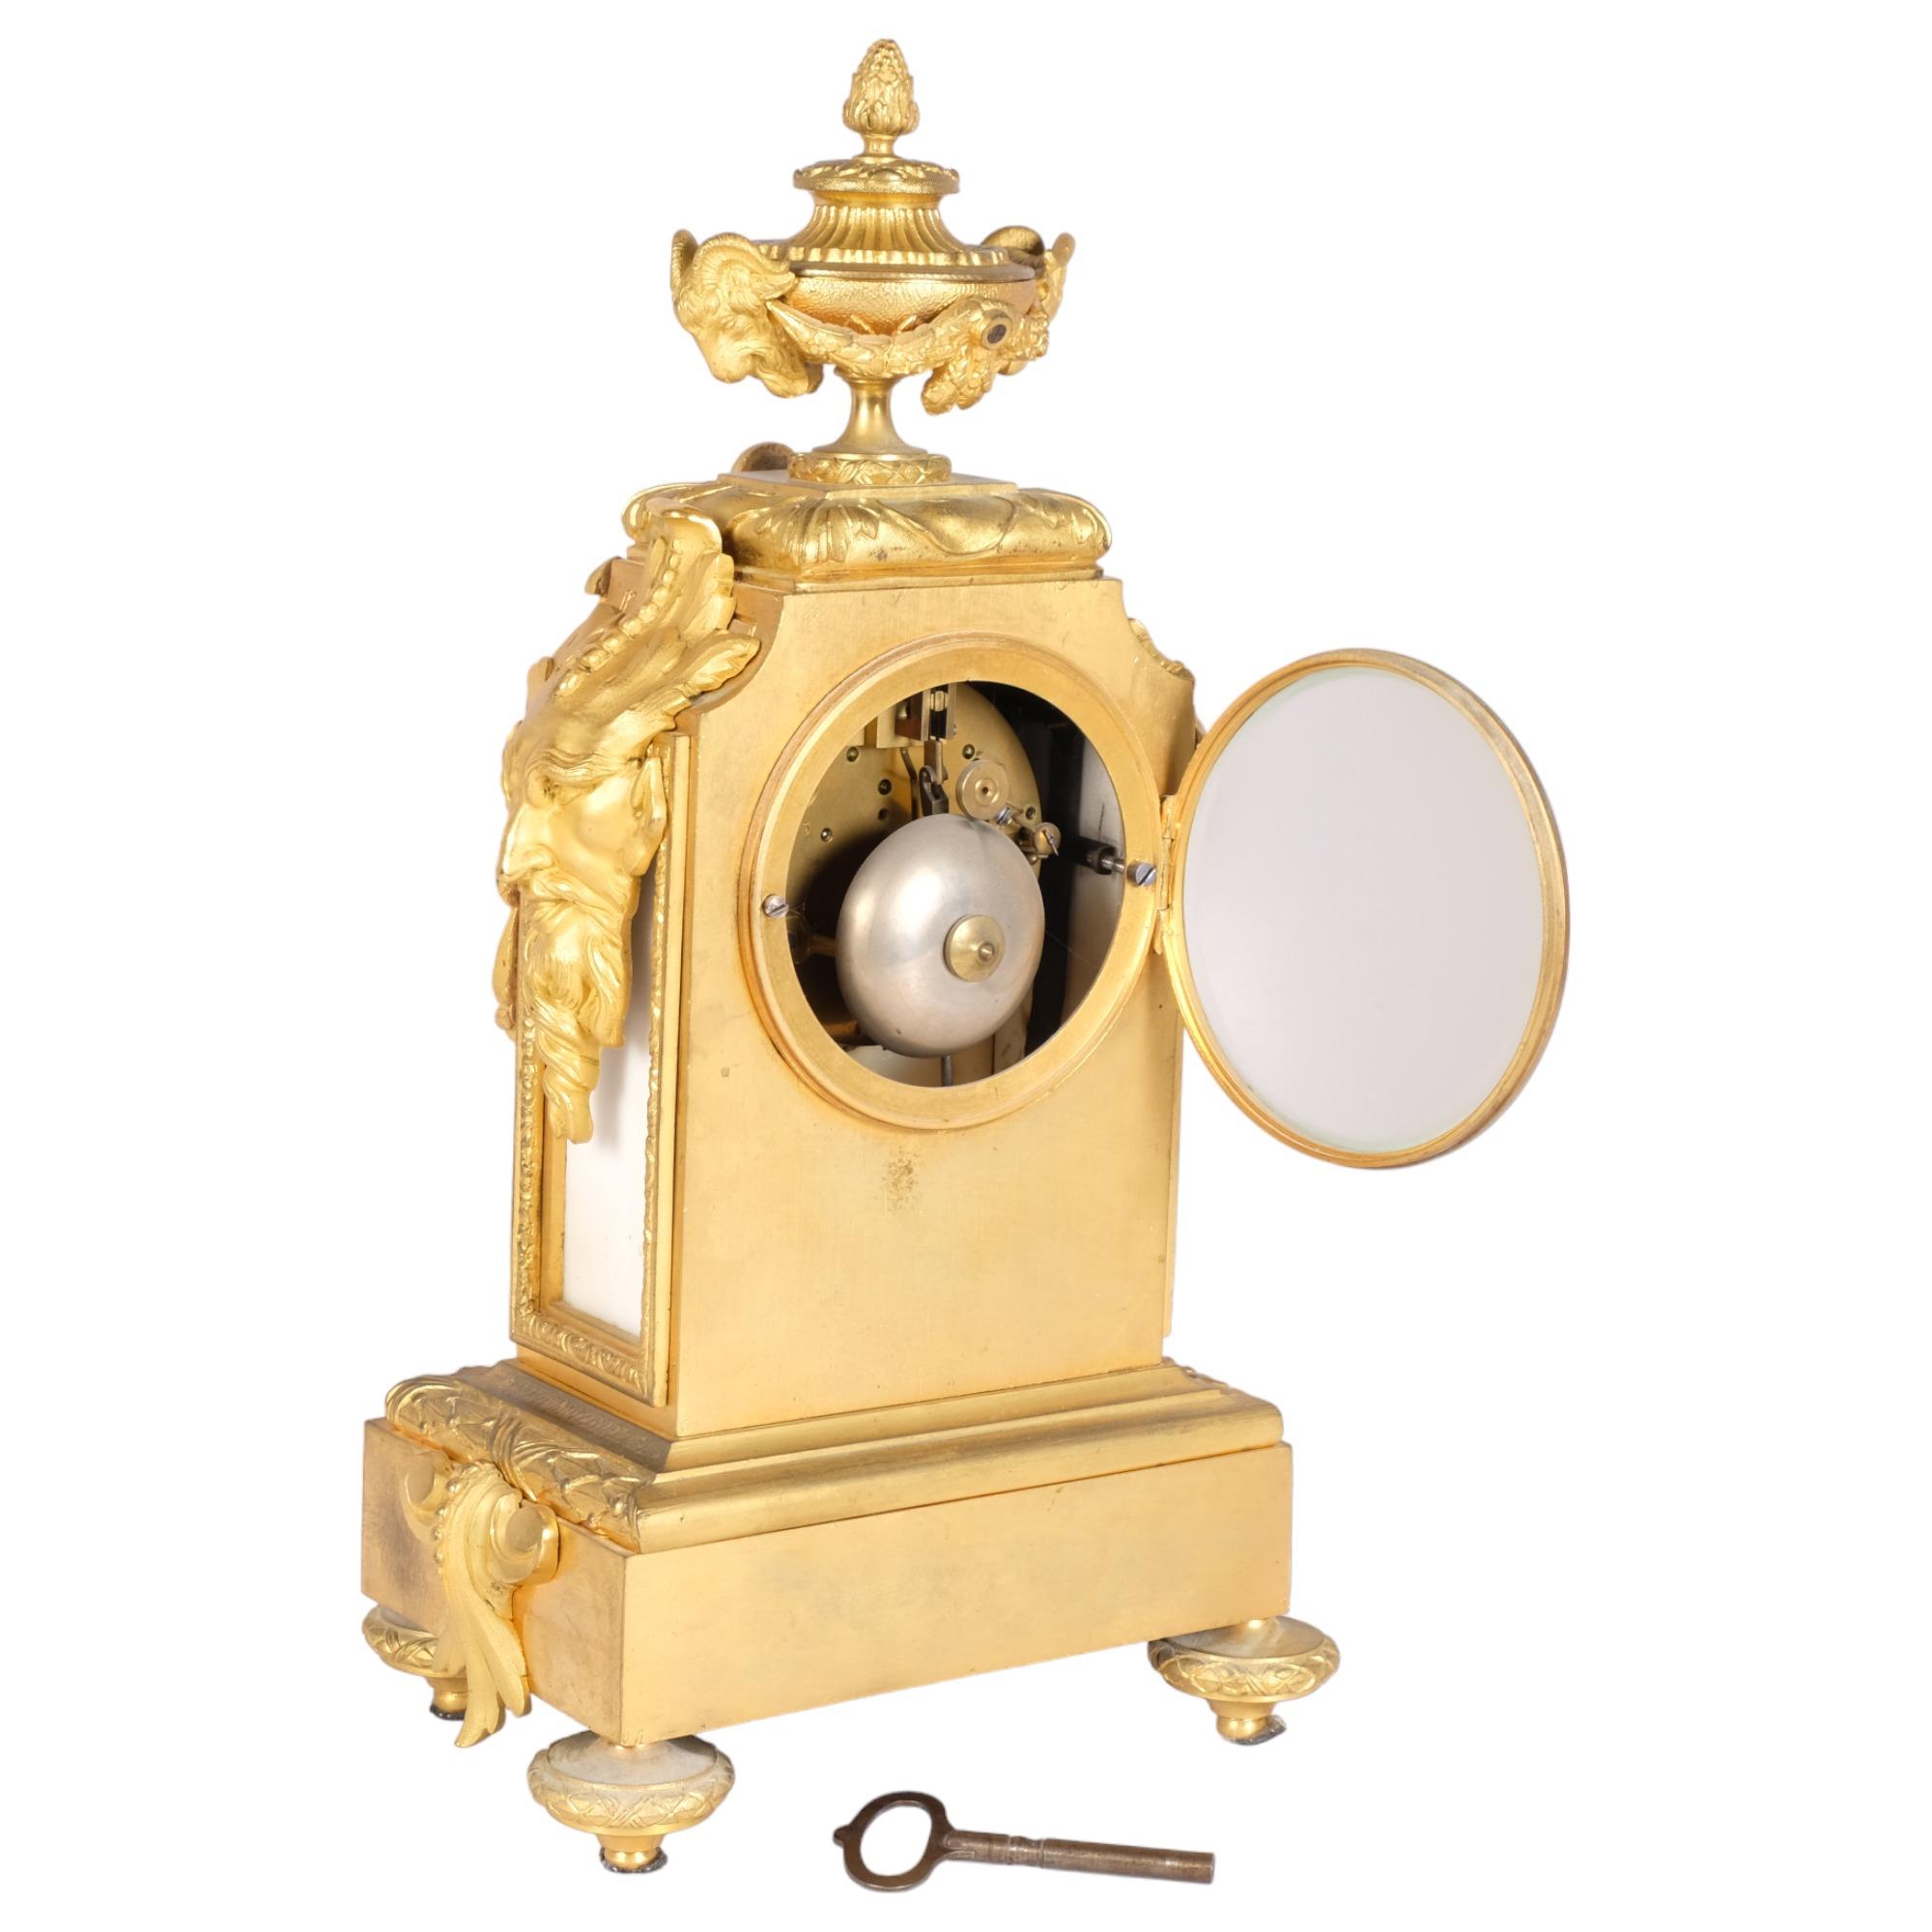 Good quality 19th century French ormolu and alabaster Rococo style mantel clock, surmounted by an - Image 3 of 3